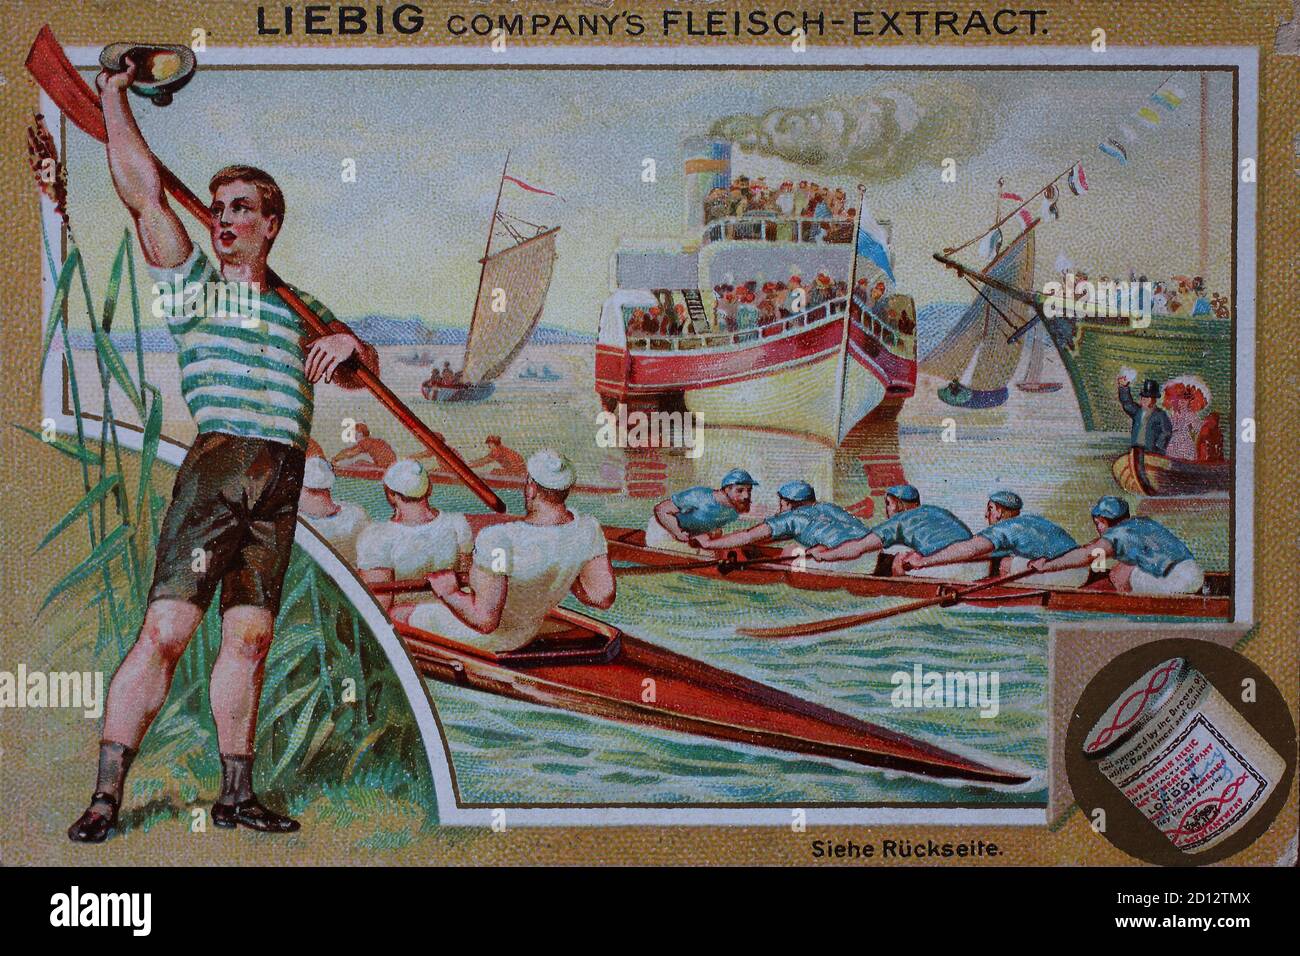 Photos Series Sport, rowing, rowing boat  /  Bilderserie Sport, Rudern, Ruderboot, digital improved reproduction of a collectible image from the Liebig company, estimated from 1900, pd  /  digital verbesserte Reproduktion eines Sammelbildes von ca 1900, gemeinfrei Stock Photo